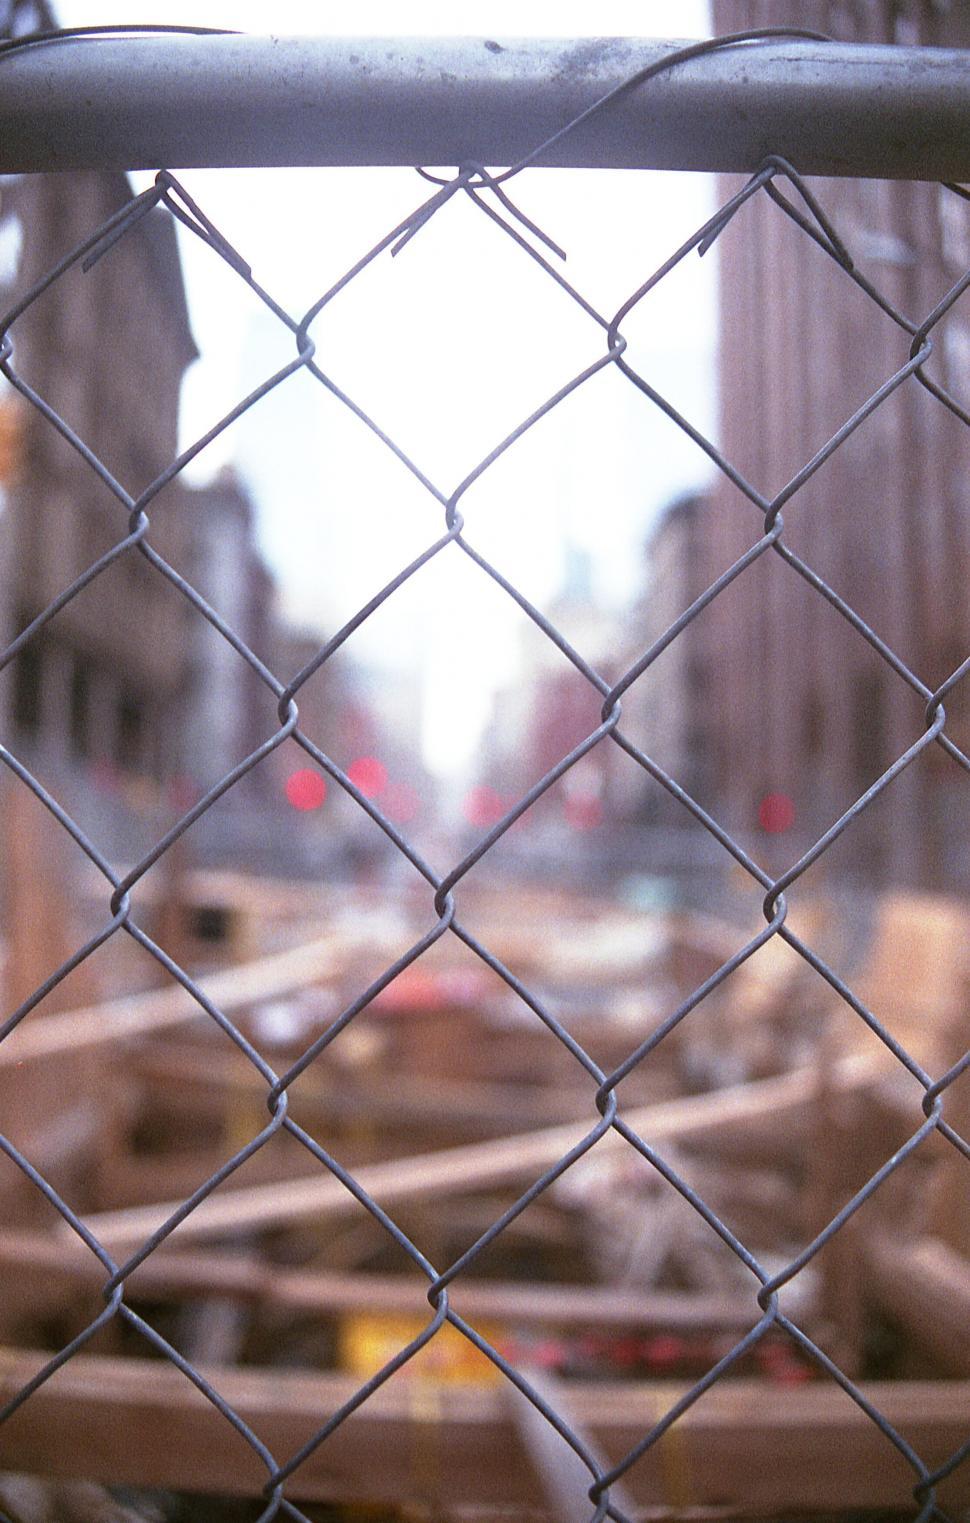 Free Image of Chain link fence with blurred background 